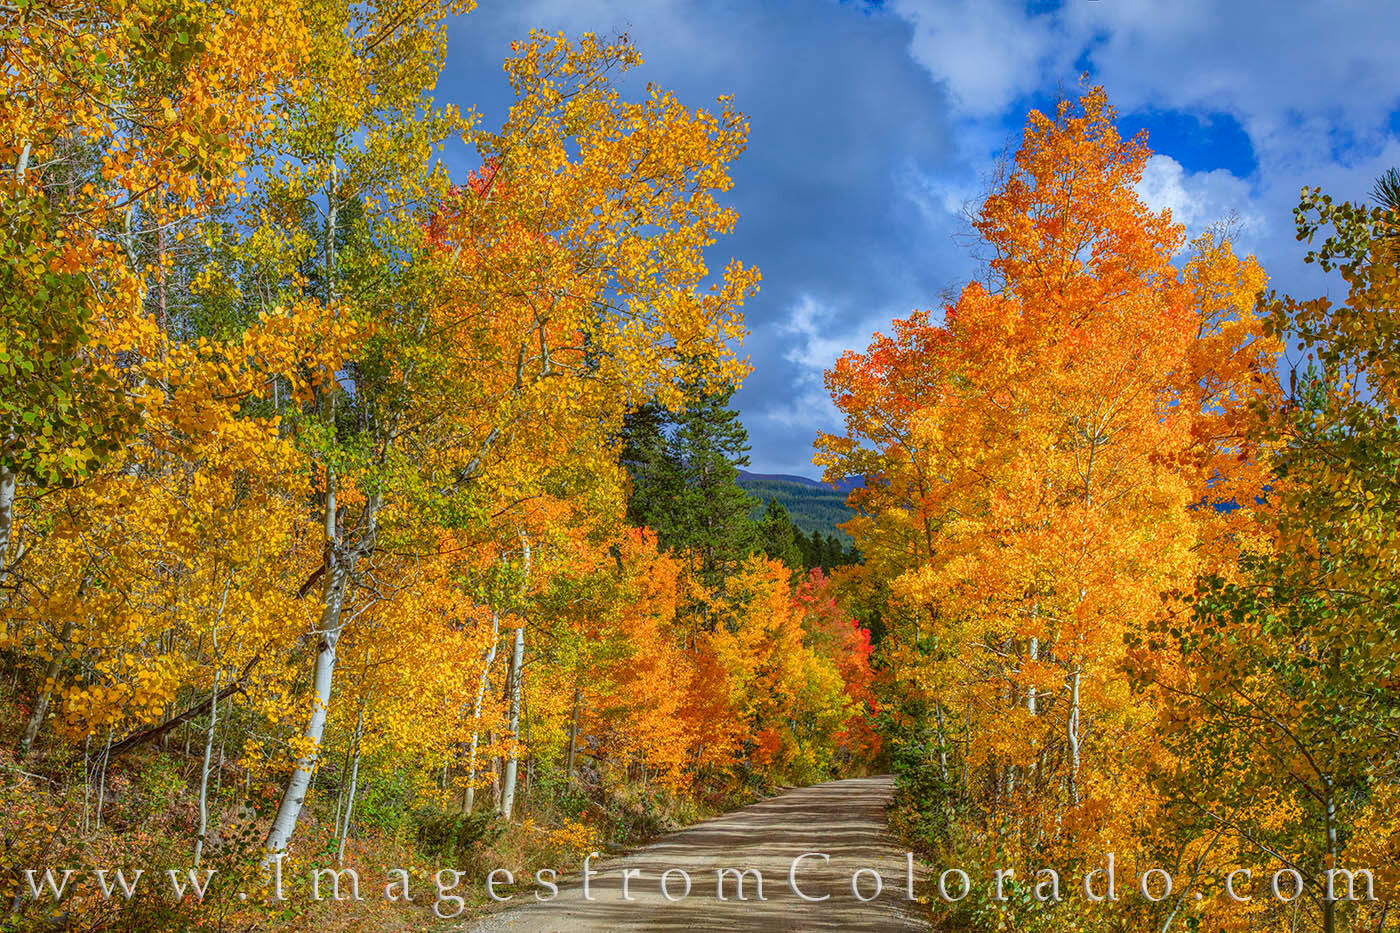 Autum of 2021 offered some of the most amazing colors I’ve witnessed in the Fraser Valley in a long time. Here, the aspen show...